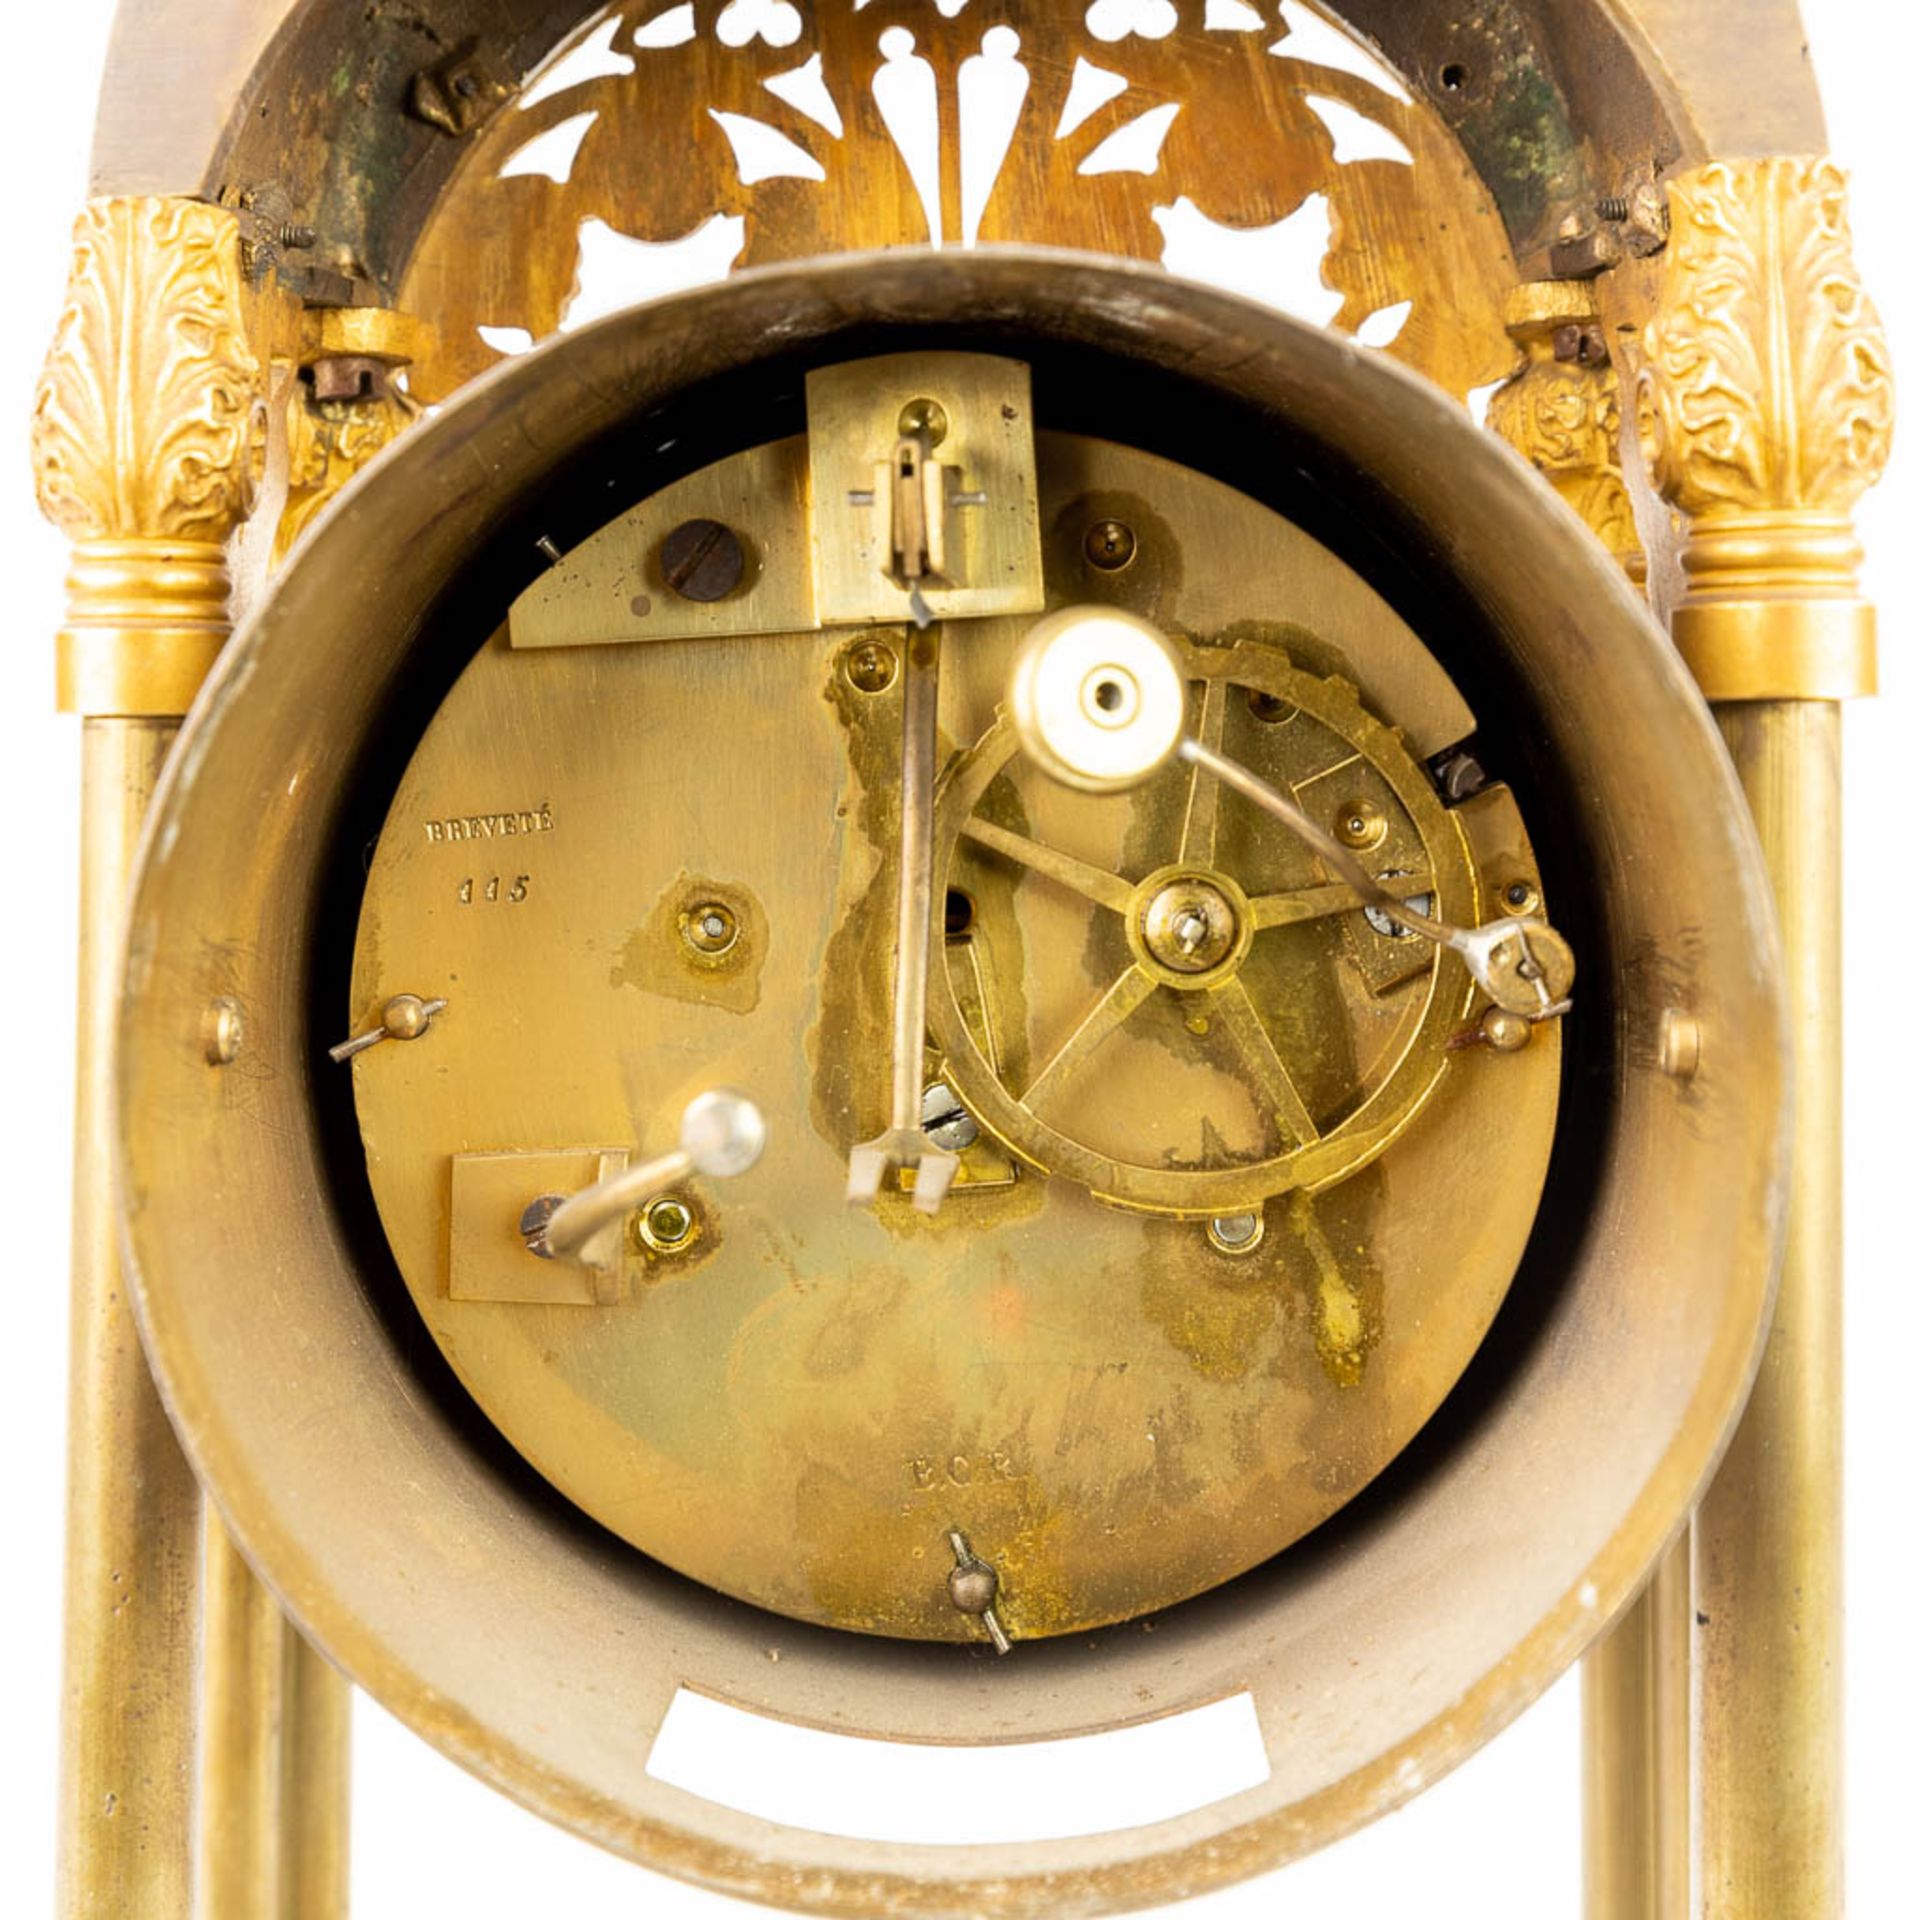 A table column clock made of gilt bronze in a gothic revival style. (11 x 19,5 x 43cm) - Image 12 of 15